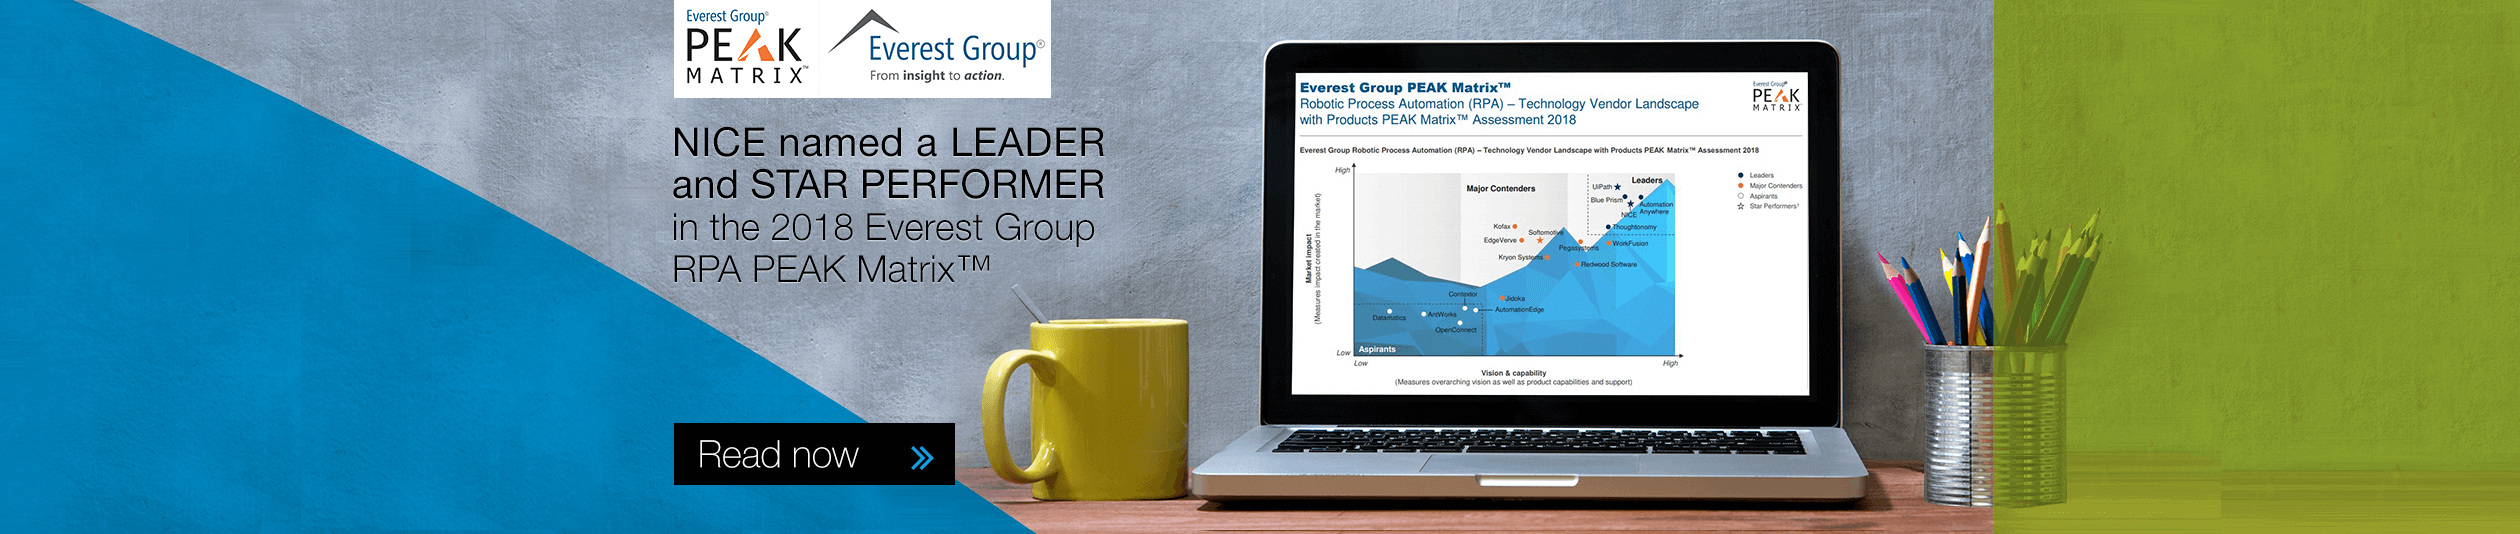 NICE named a LEADER and STAR PERFORMER in the 2018 Everest Group RPA PEAK Matrix™